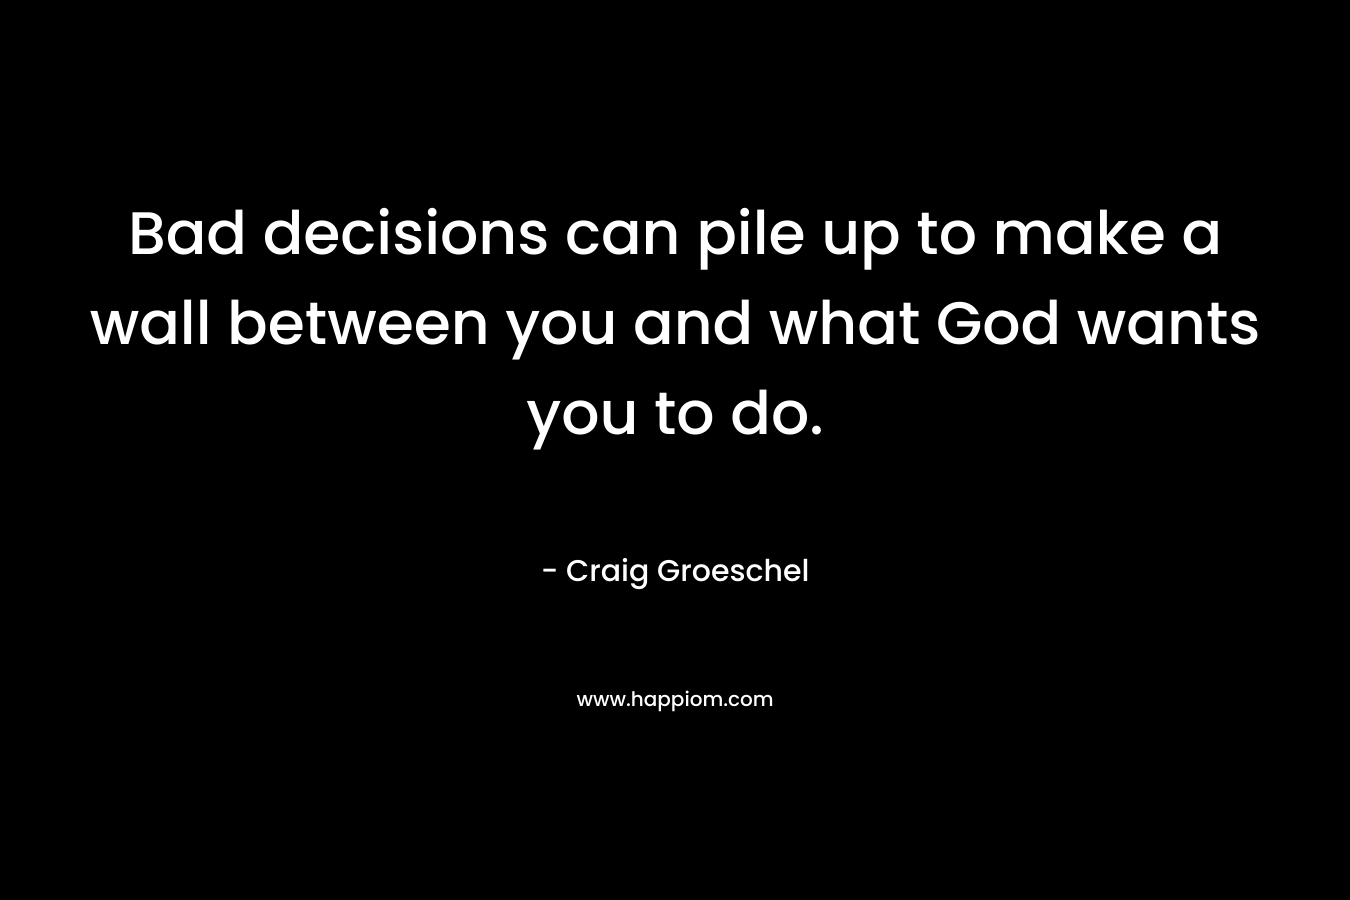 Bad decisions can pile up to make a wall between you and what God wants you to do.